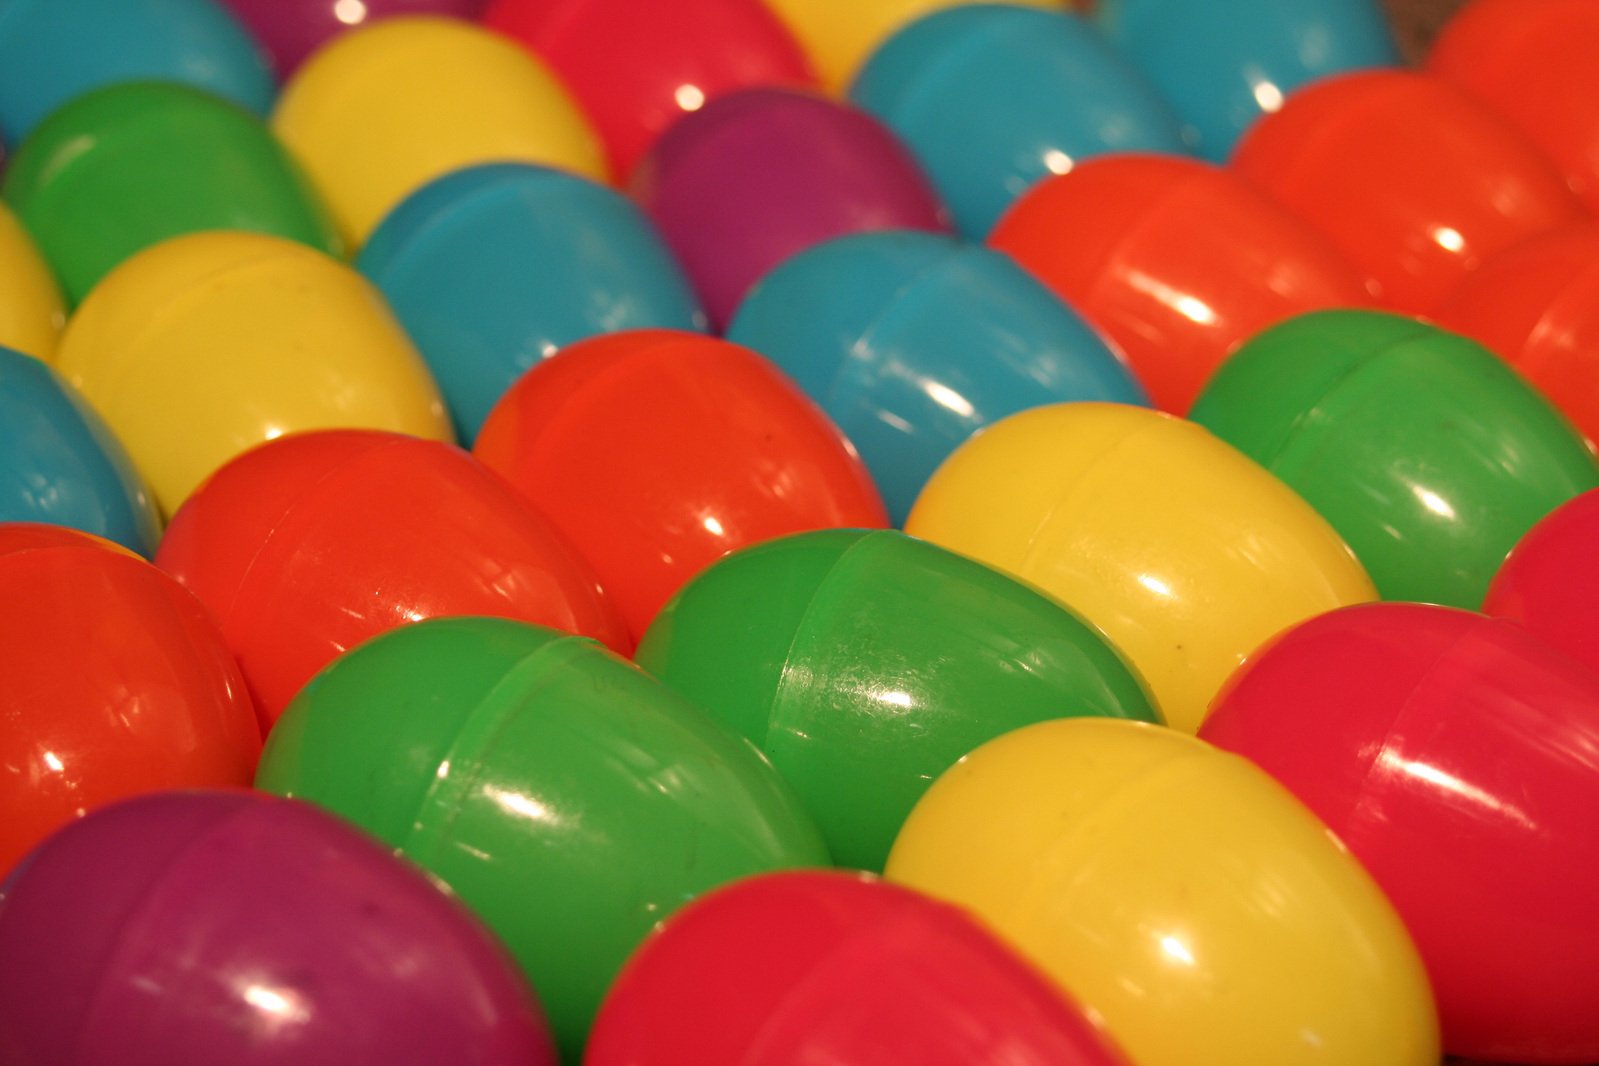 the rainbow colored balls have been made of plastic